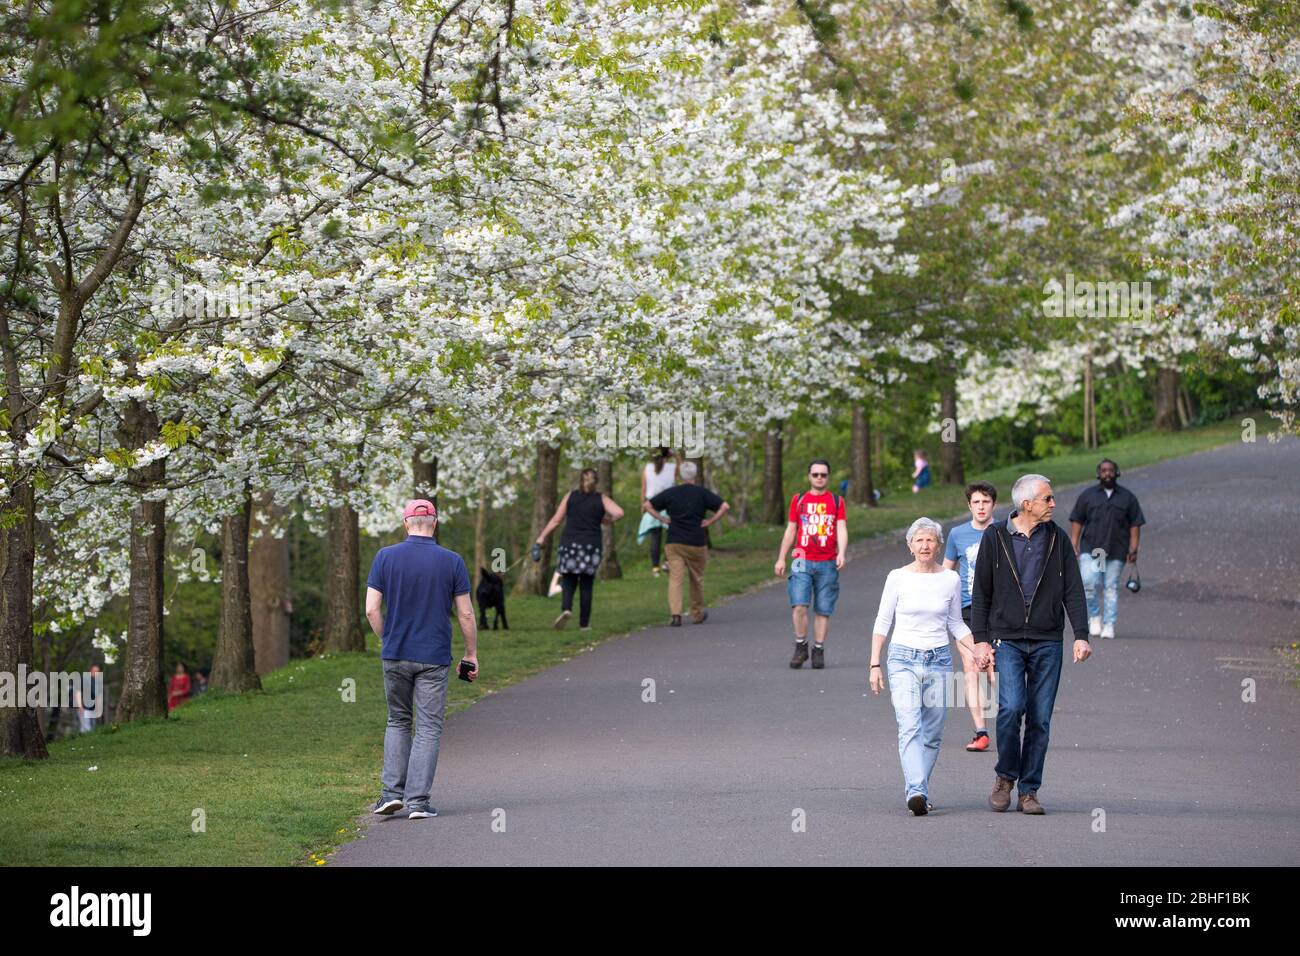 Glasgow, UK. 25th Apr, 2020. Pictured: Scenes from the first weekend of the extended lockdown from KelvinGrove Park in Glasgow's West End during a very hot and sunny Saturday. Credit: Colin Fisher/Alamy Live News Stock Photo